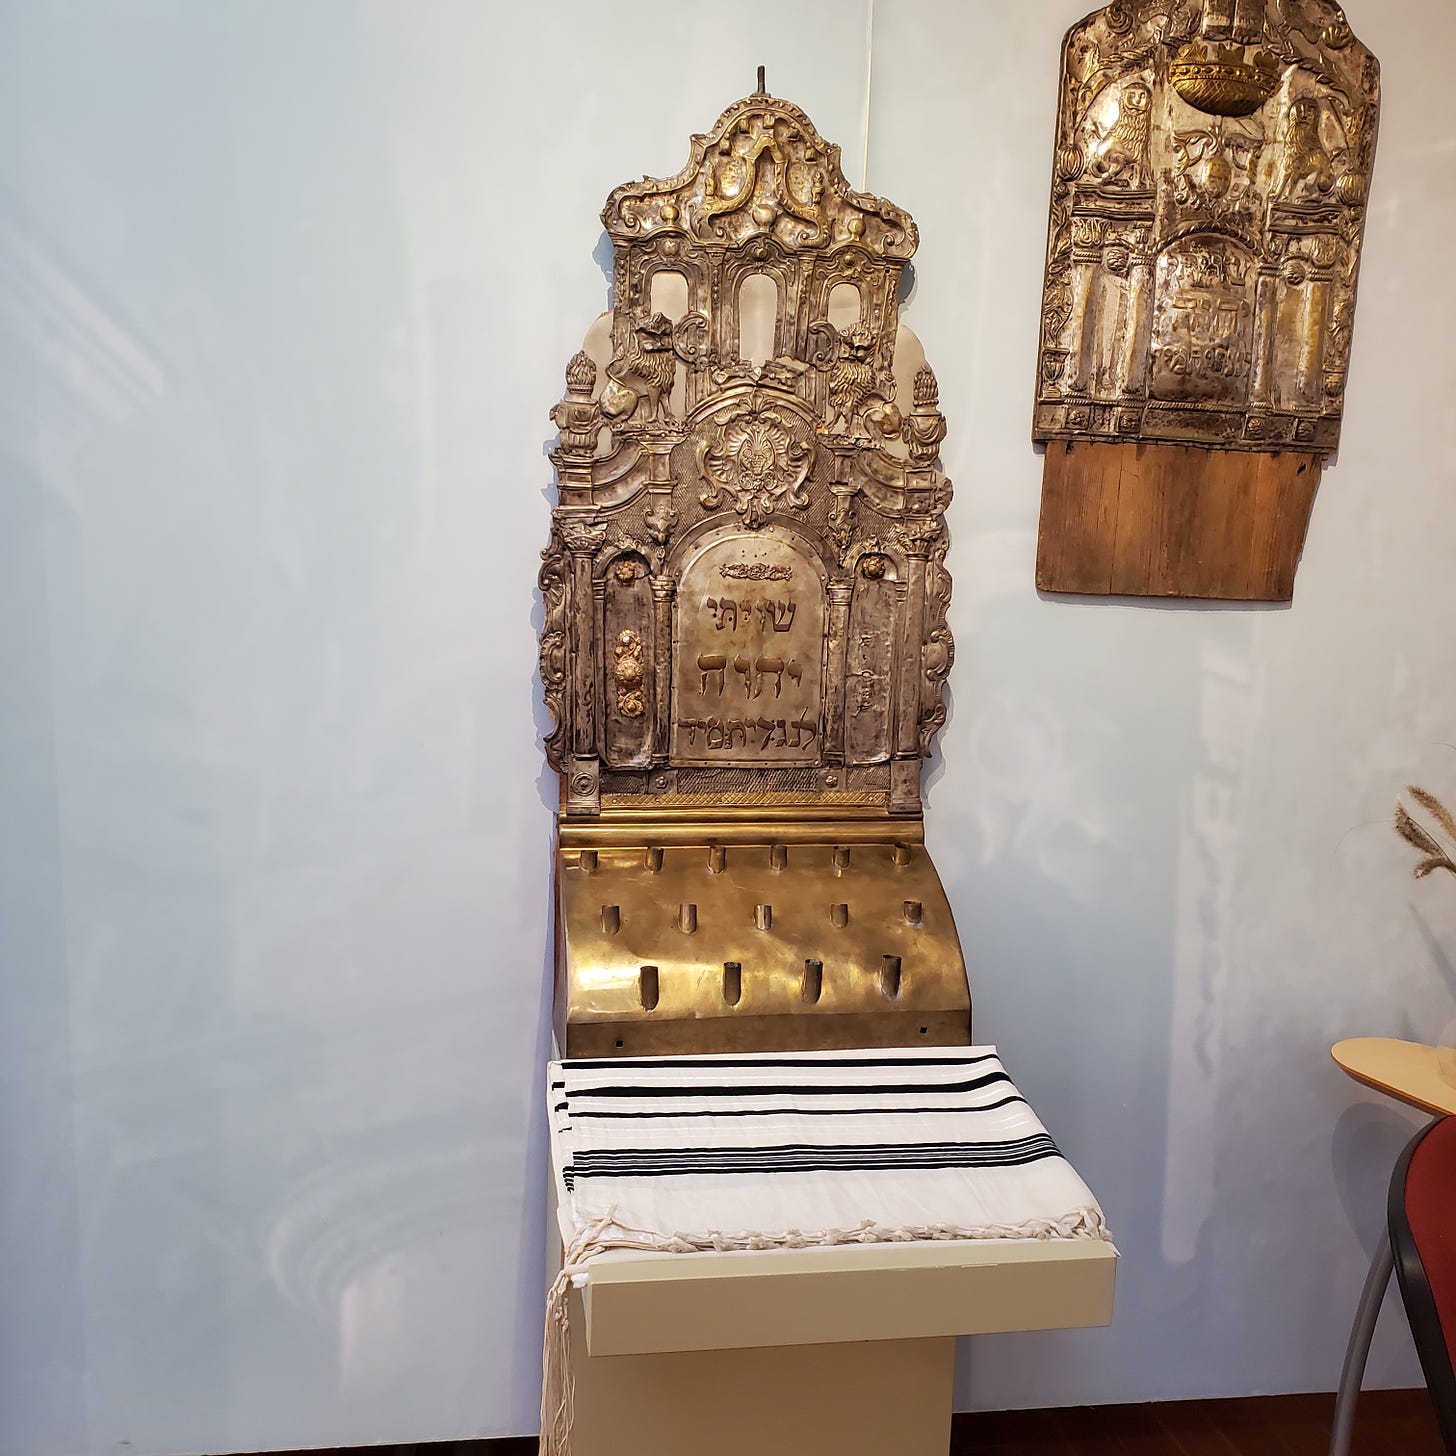 Three metal artifacts from the temple with Hebrew writing and elaborate decoration and Tallit.